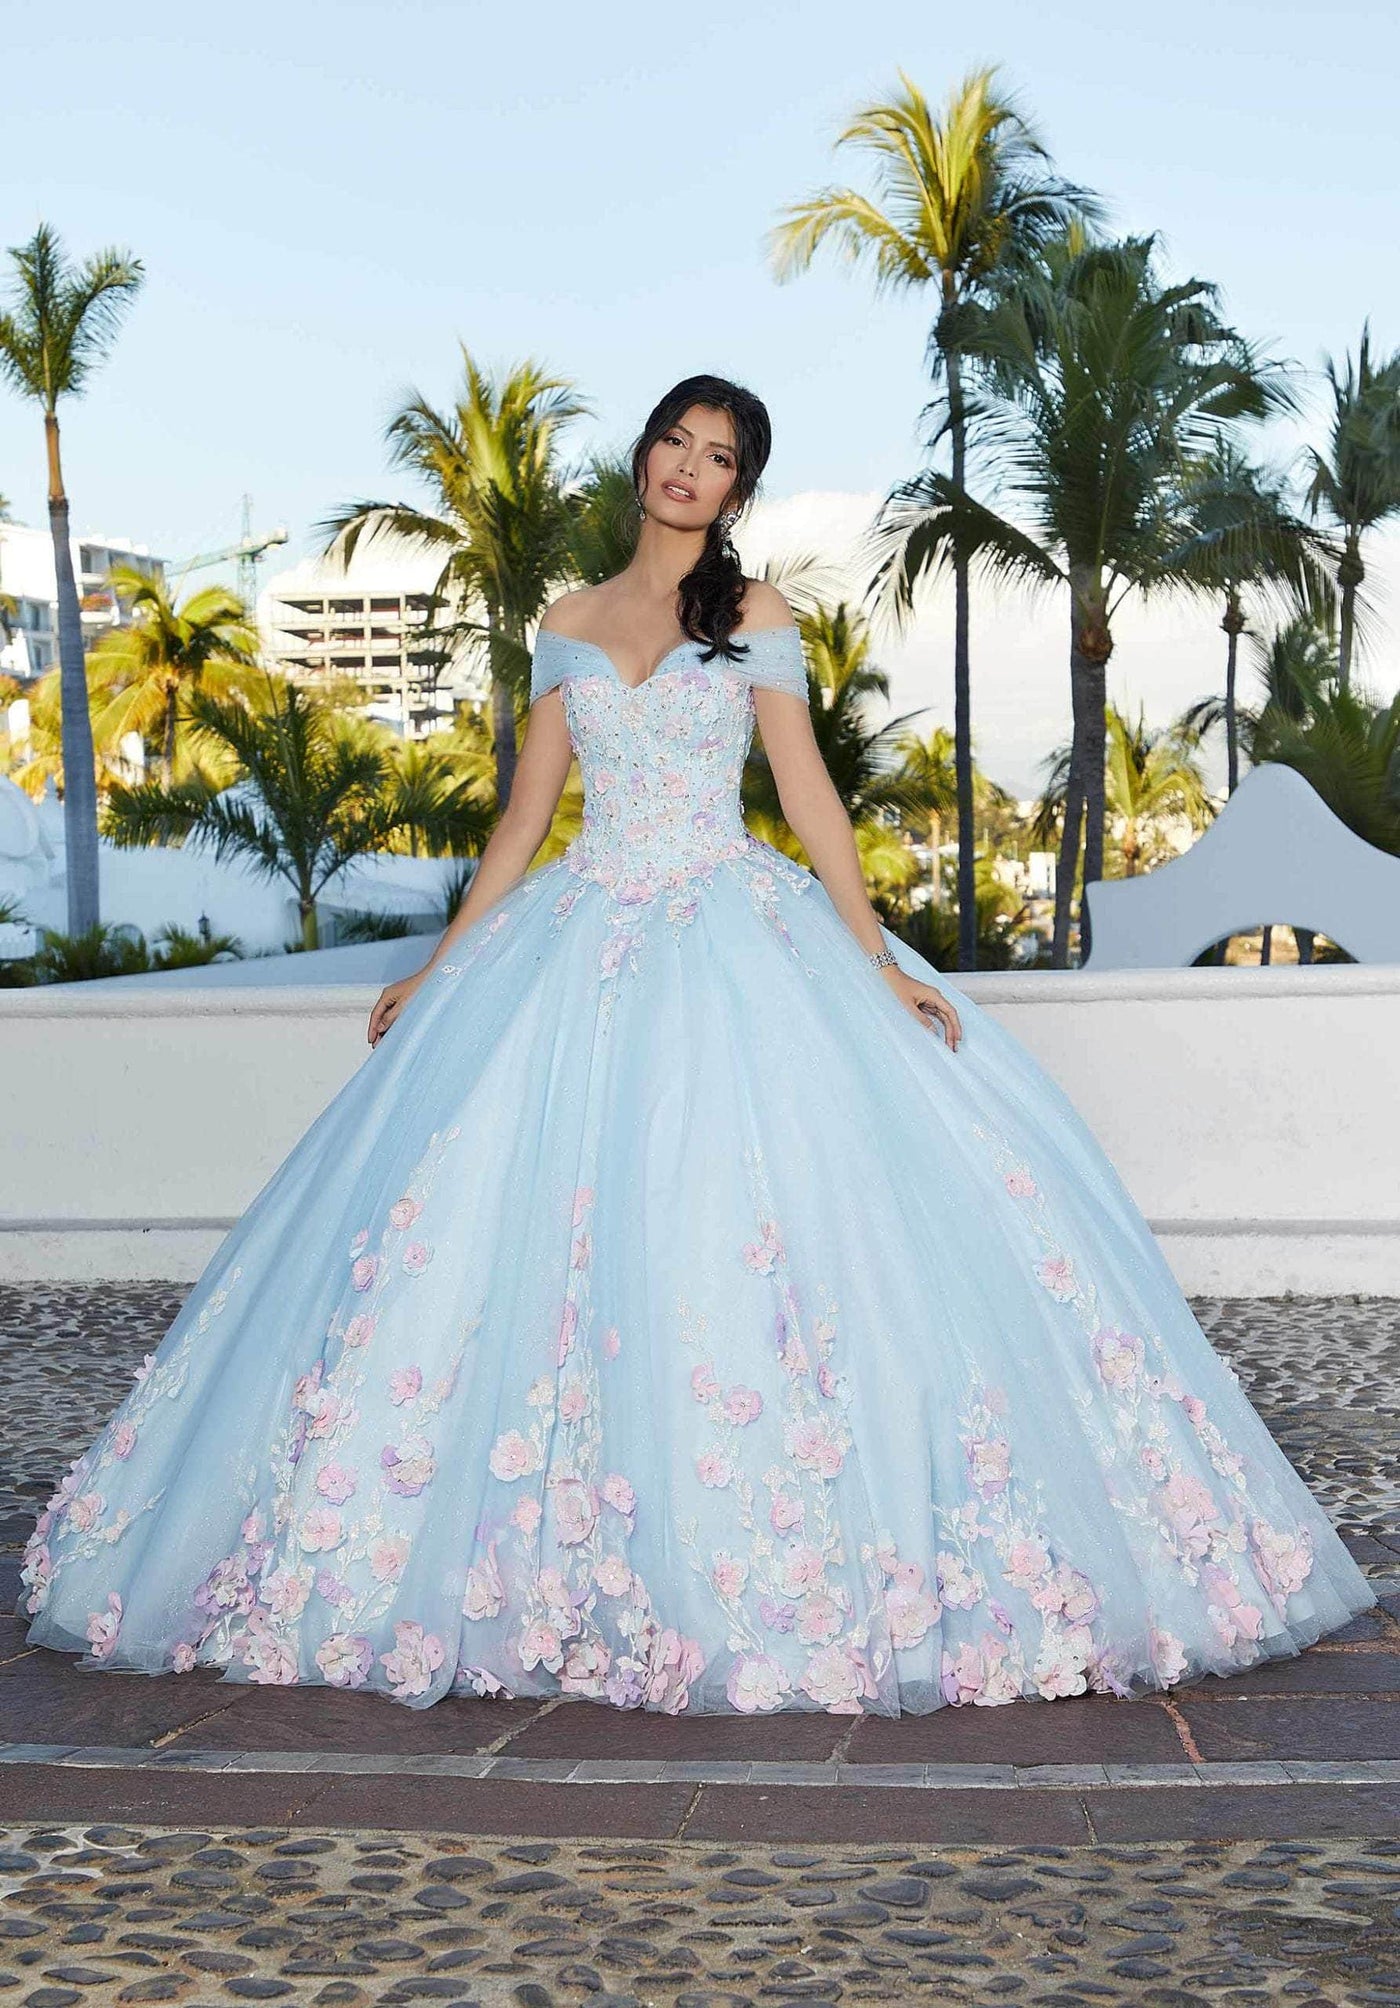 Mori Lee 60165 - 3D Floral Appliqued Sweetheart Ballgown Special Occasion Dress